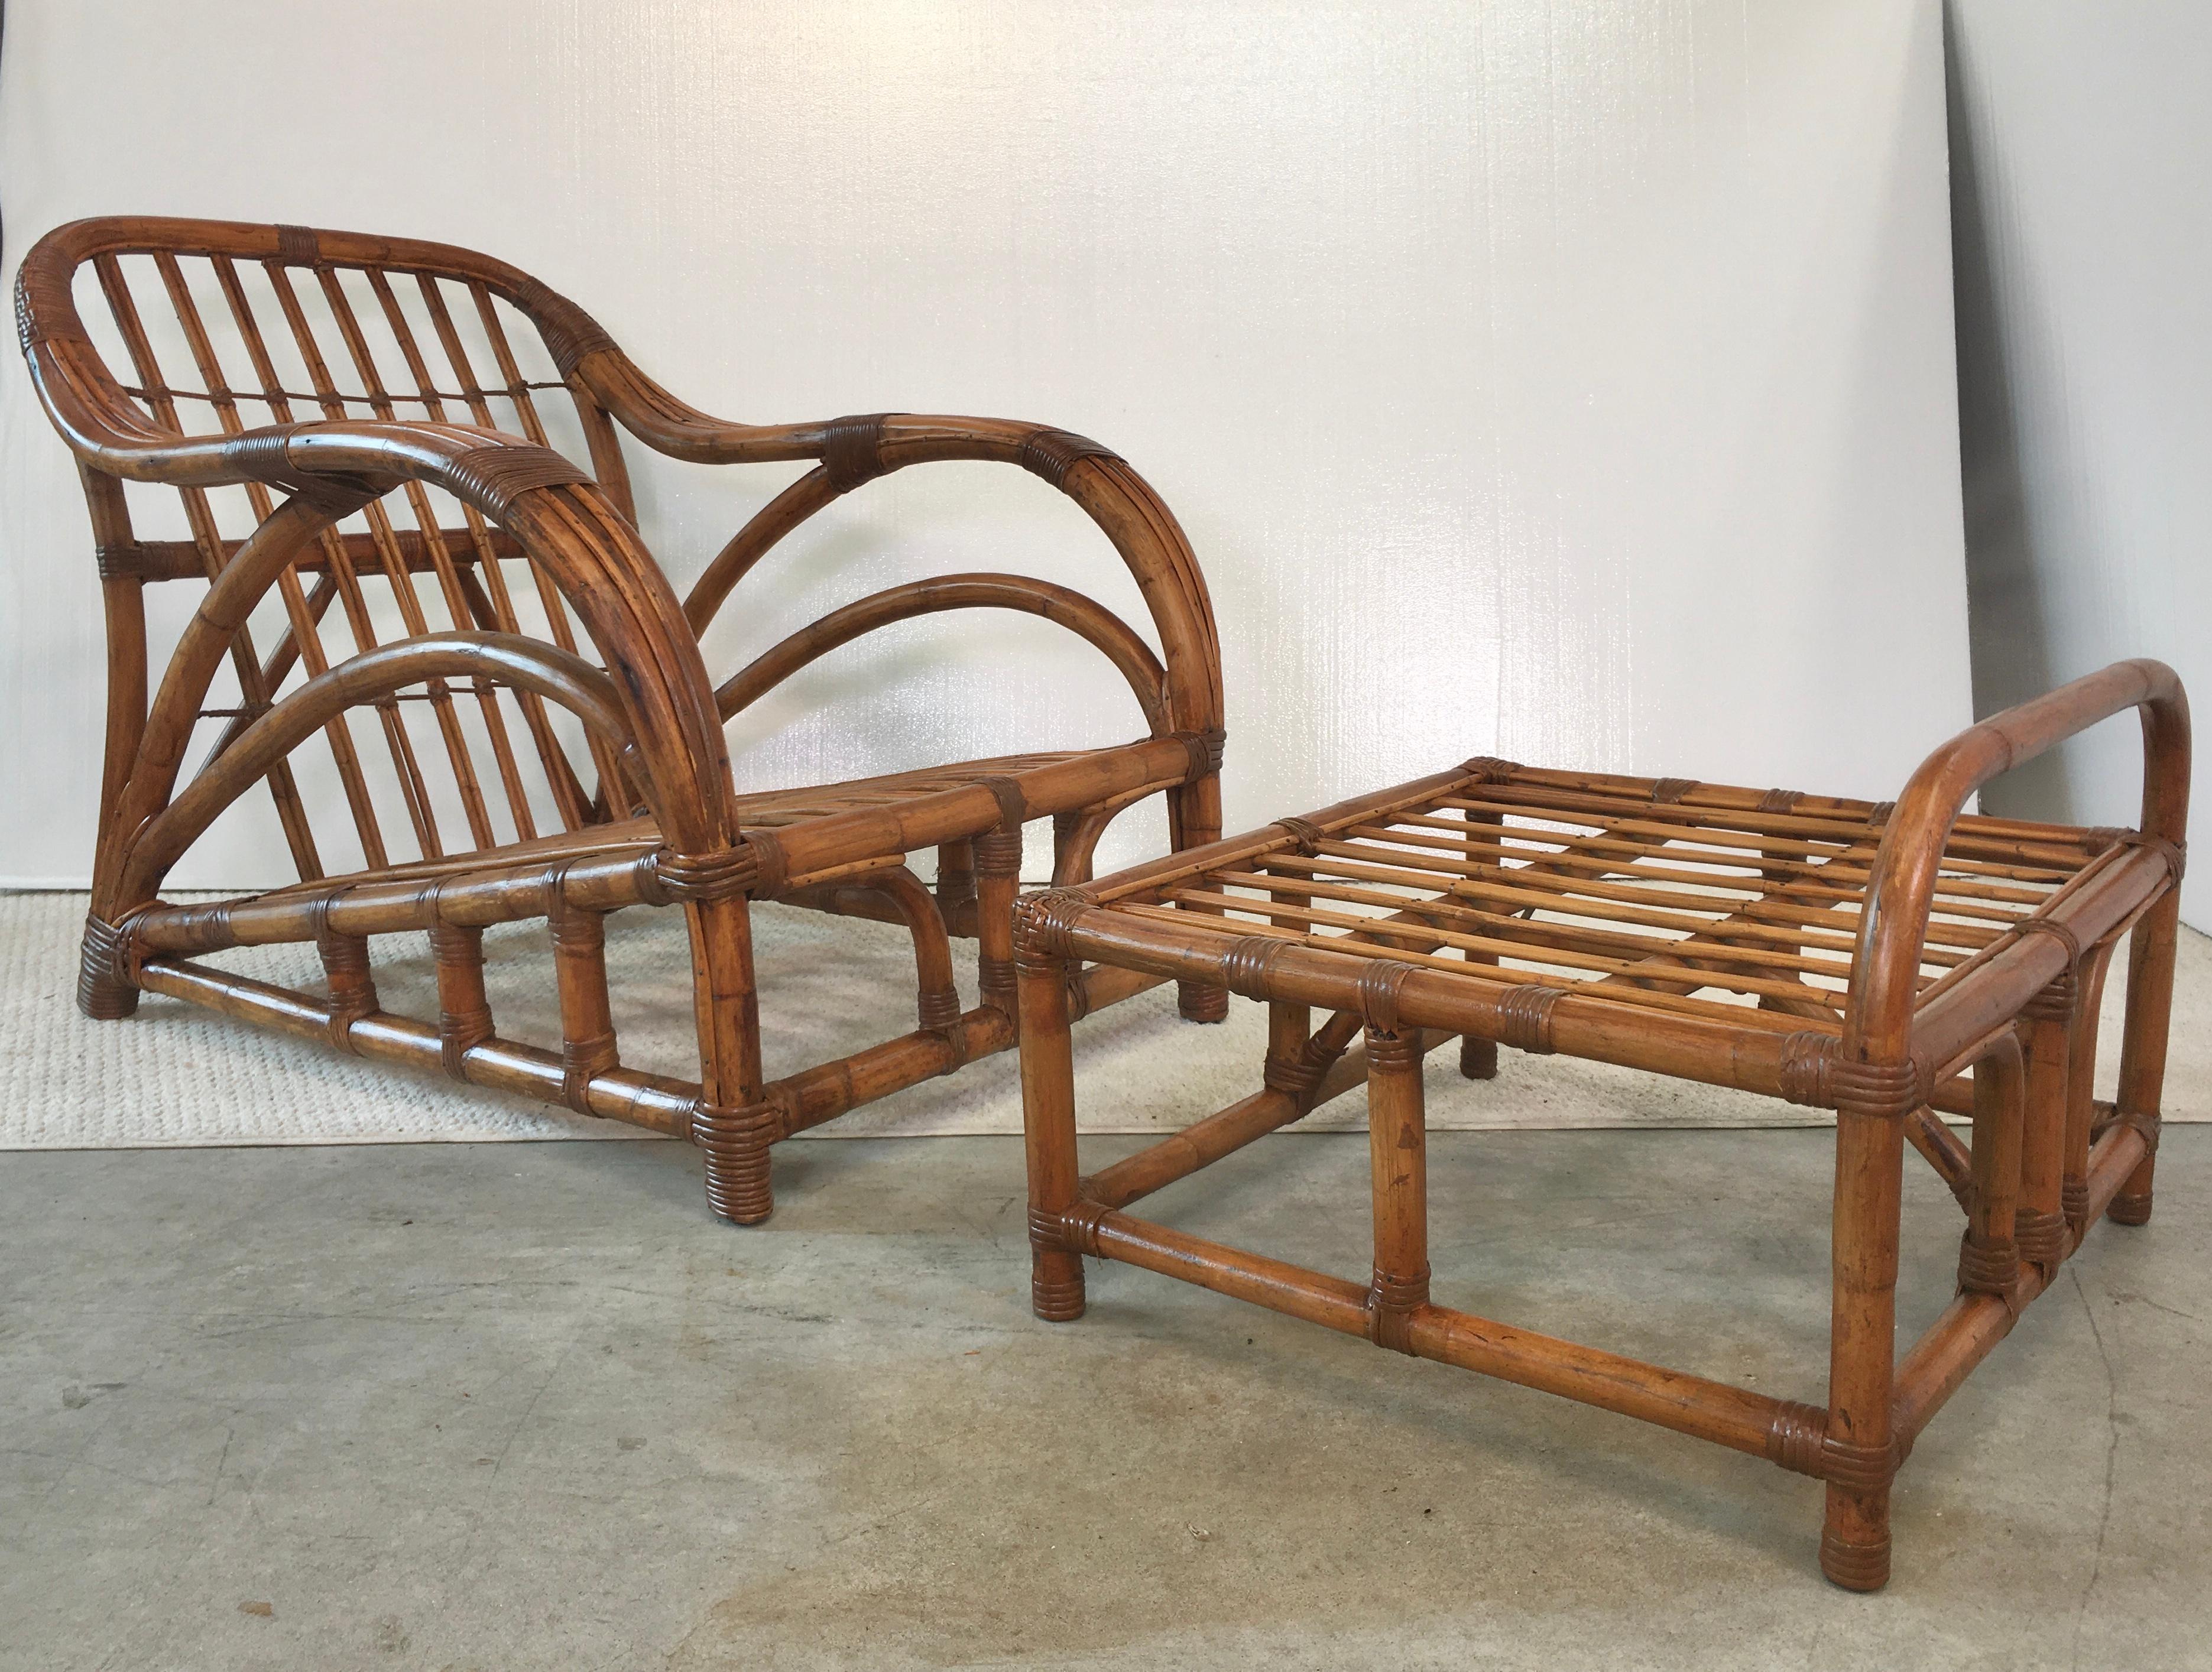 Sleek, streamlined and generously proportioned 1940s Art Deco rattan roadster lounge chair and ottoman. Big chair for a big man. Note how beautifully the three tubular strands of the arms flow sinuously into the arched back of the chair. Solid,